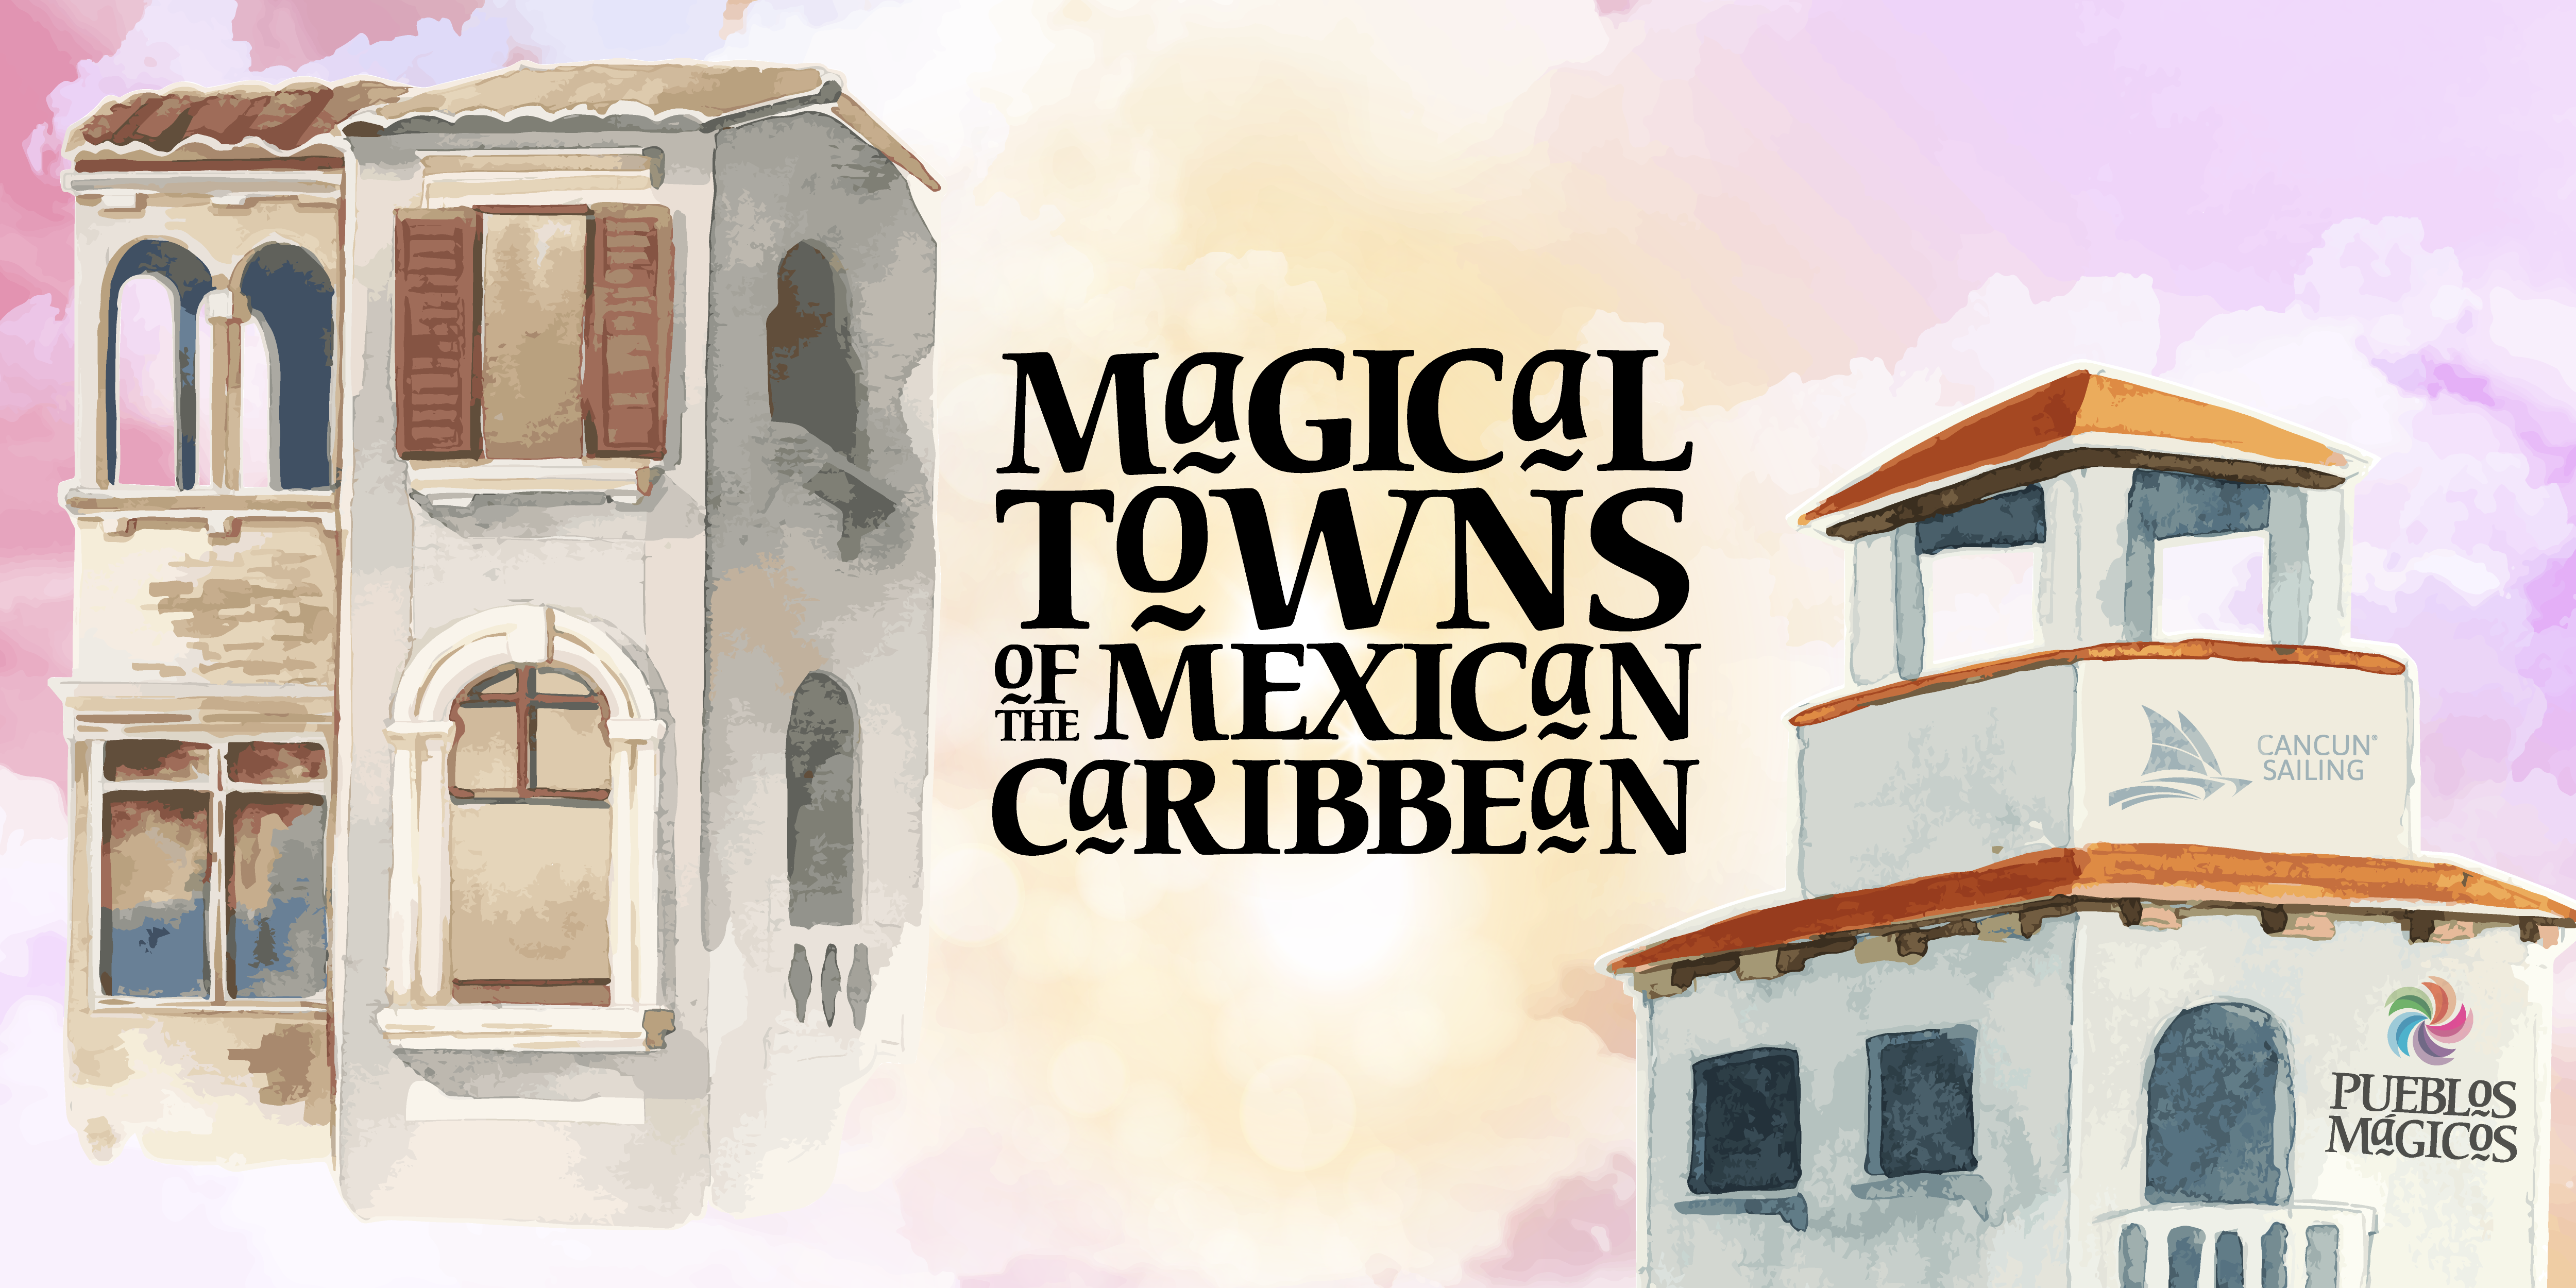 The 7 Magical Towns closest to Cancun